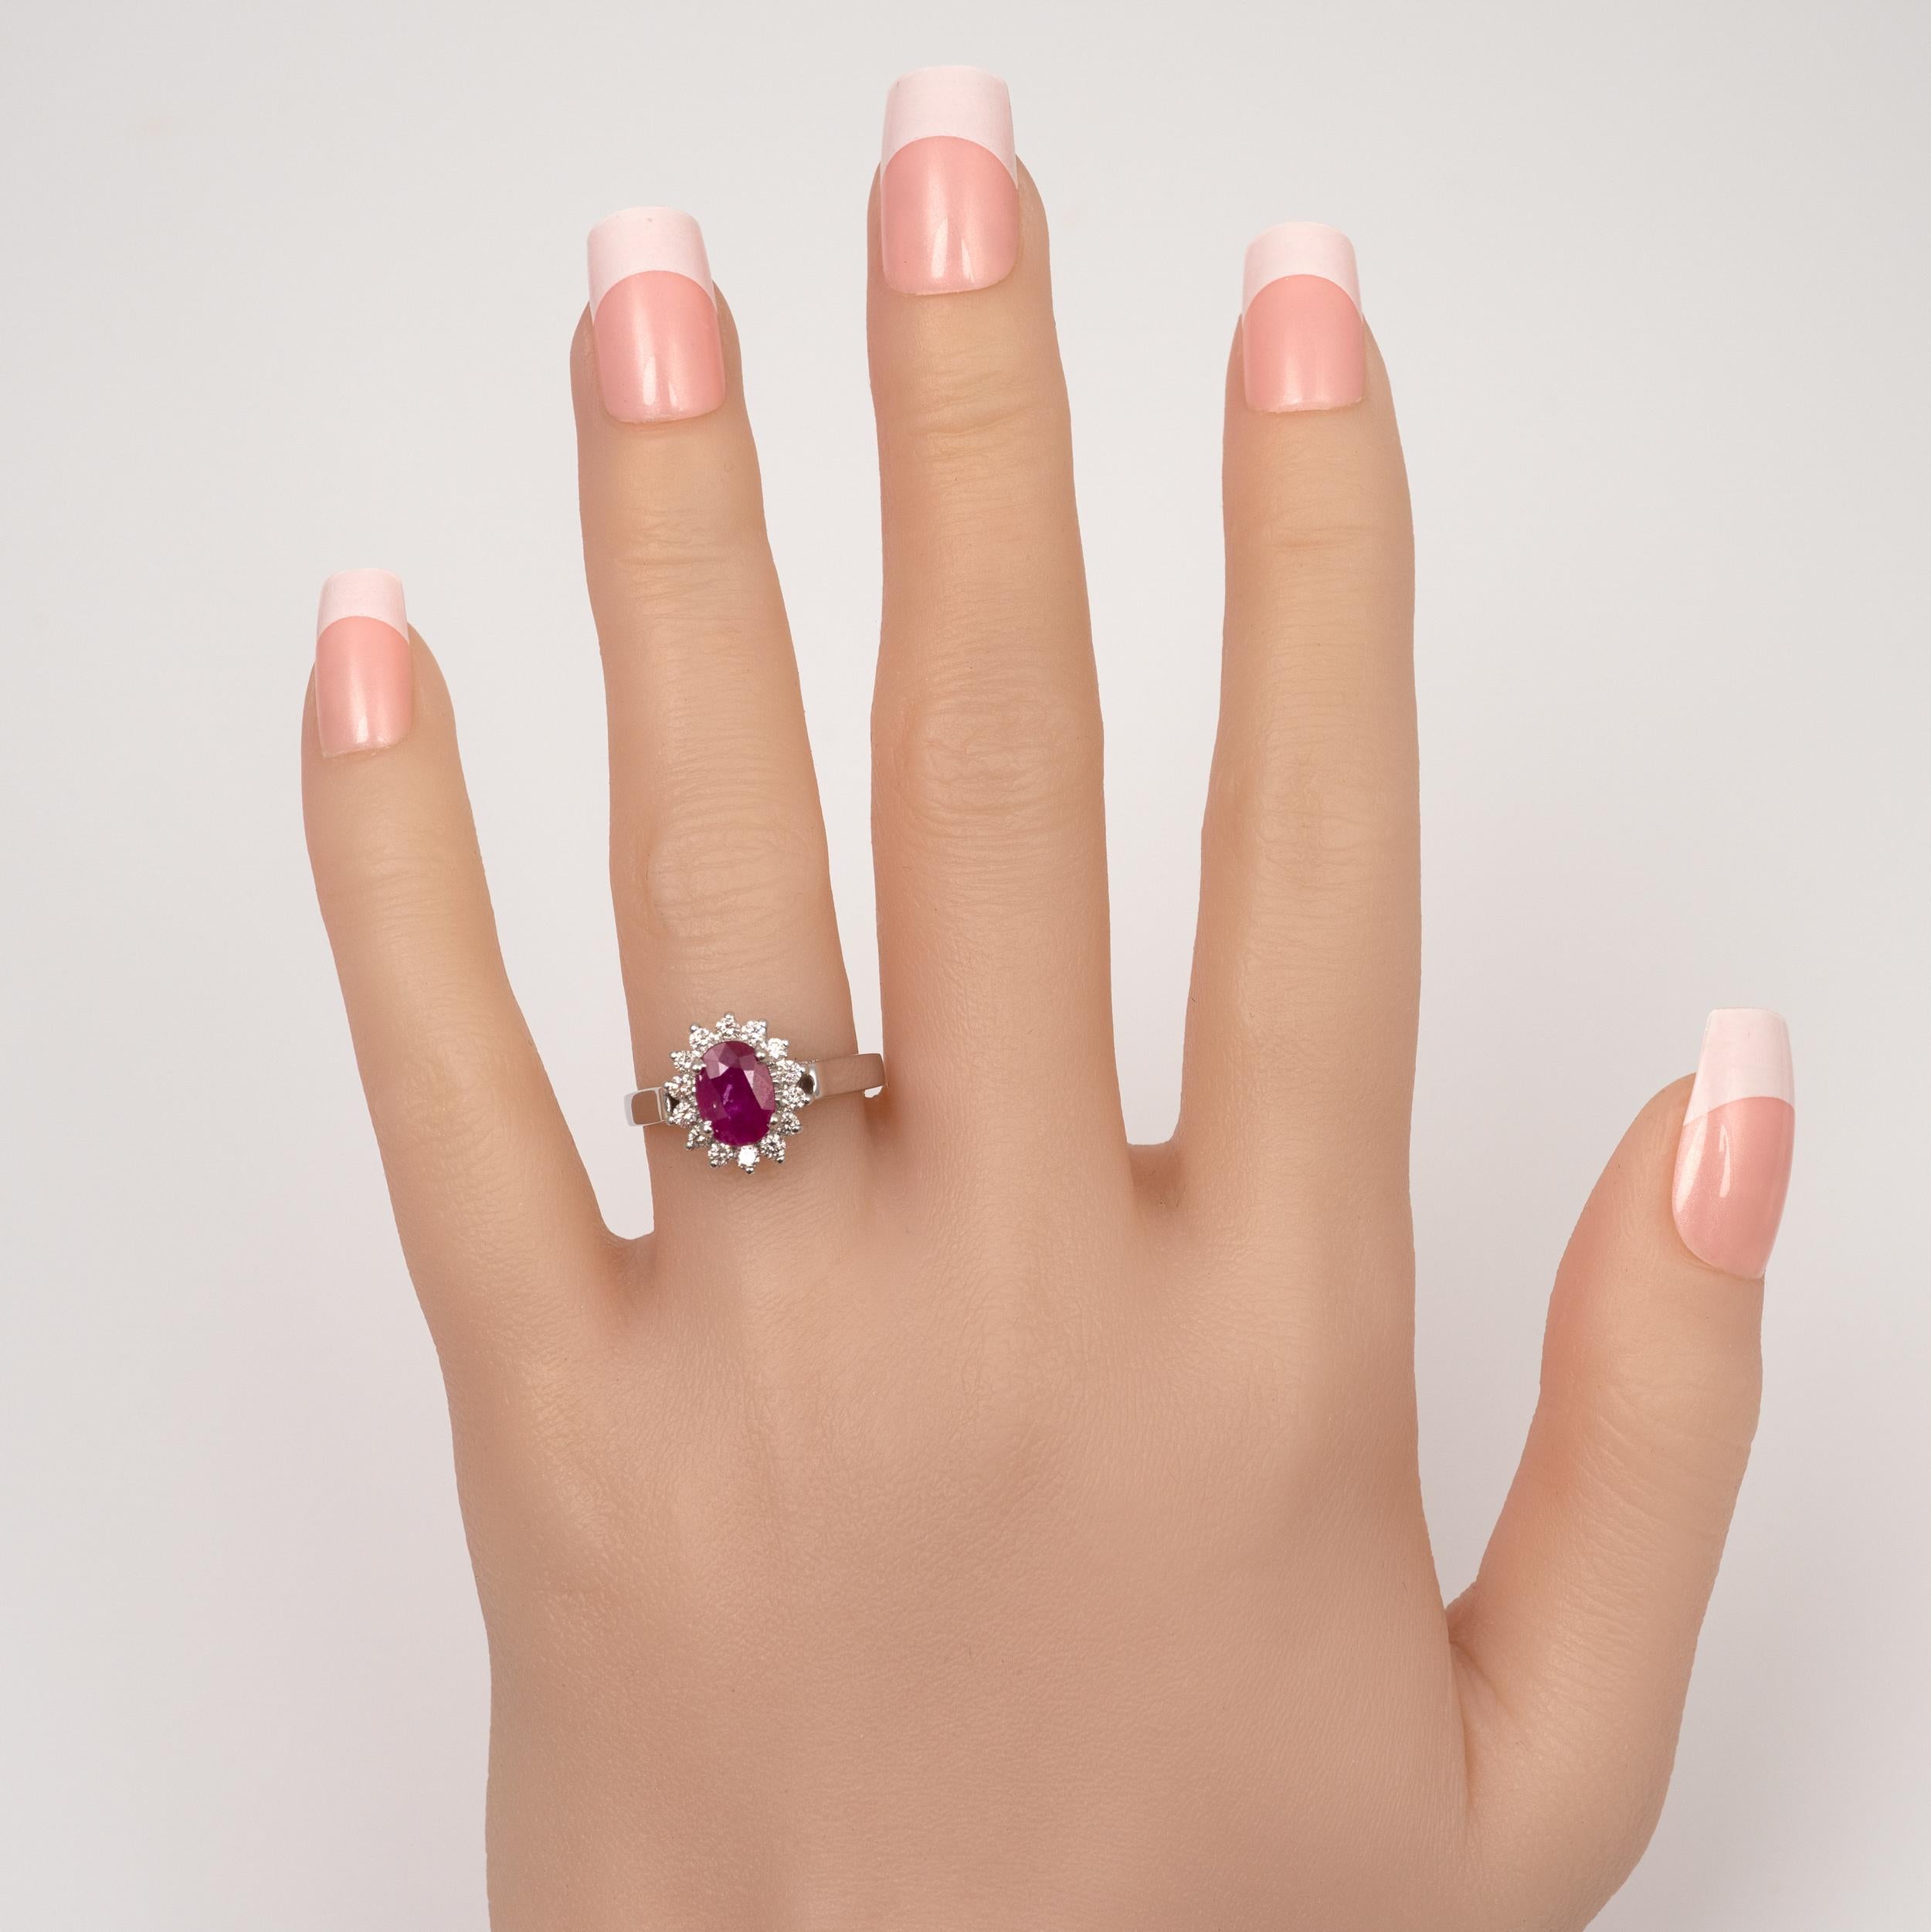 This fine quality oval cut ruby diamond halo ring is crafted in 18 karat white gold.

Featuring an oval-cut natural ruby and complimenting surround of SI-quality round-cut diamonds. The ruby is 4 prong-set and shows natural inclusions.

Crafted by